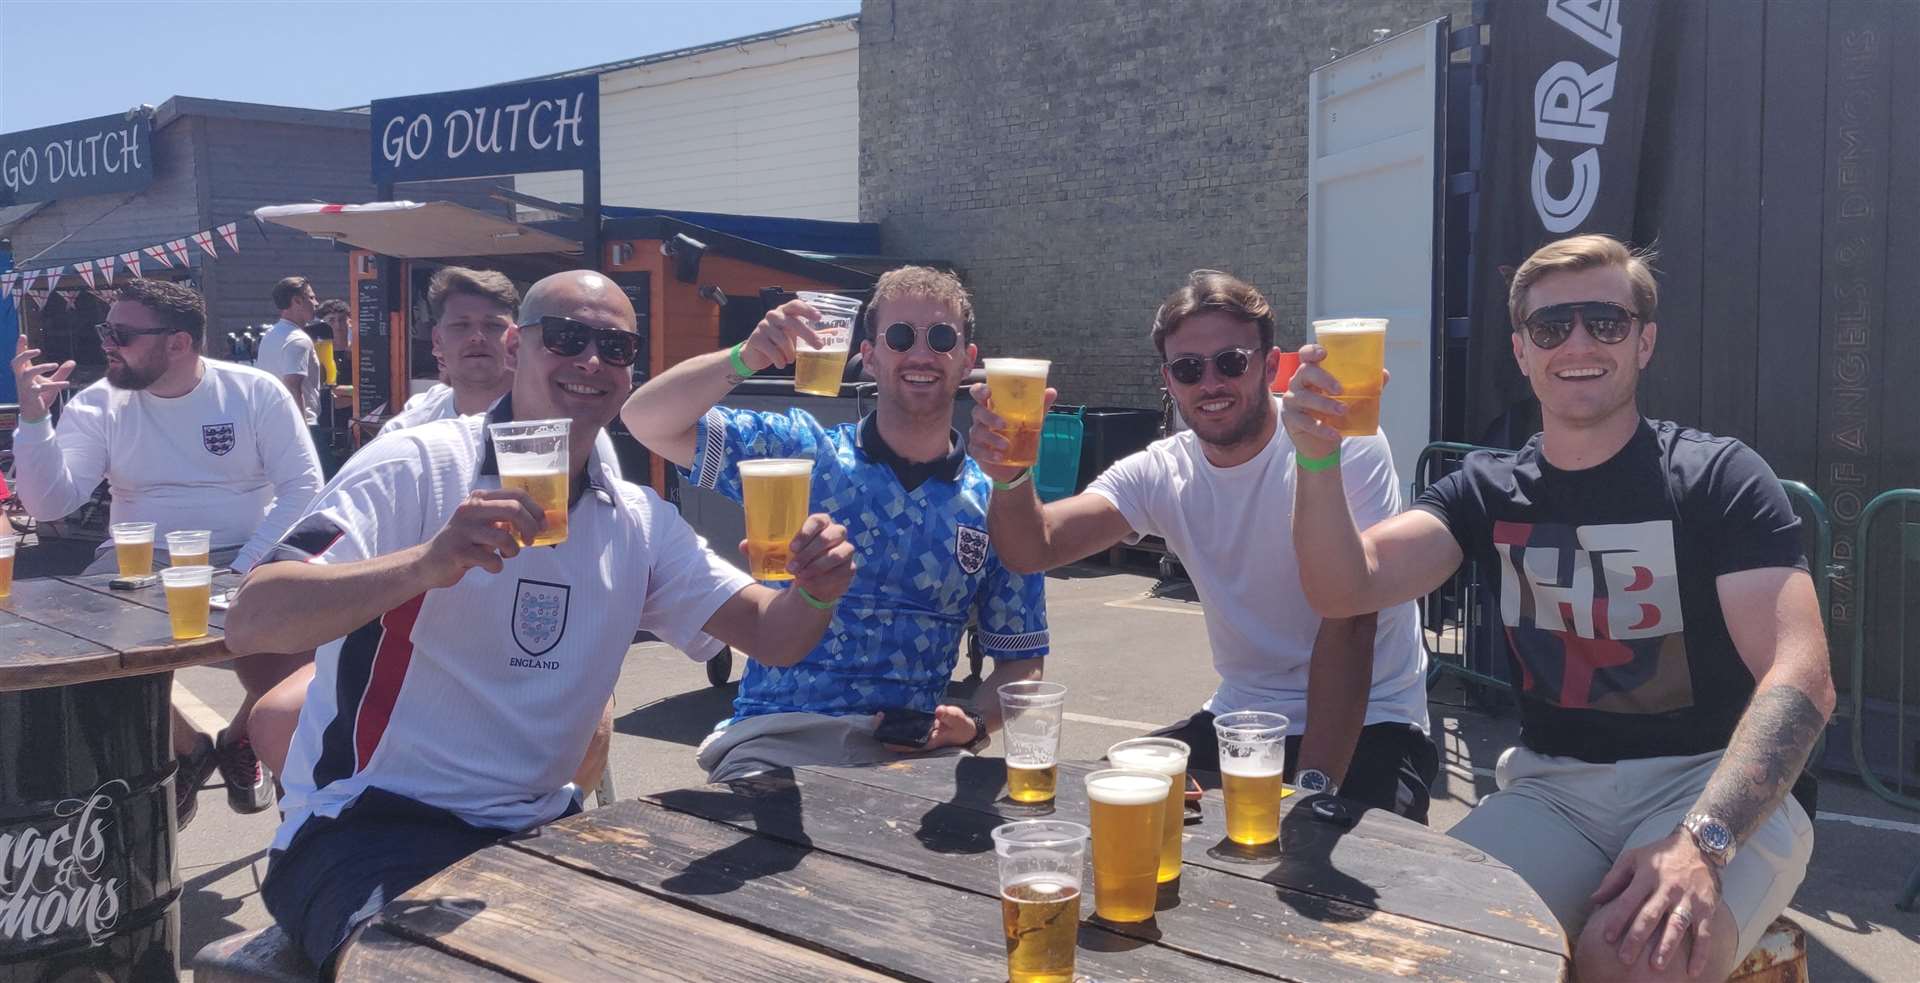 Fans enjoying a pre-match pint (or two) ahead of the England v Croatia game